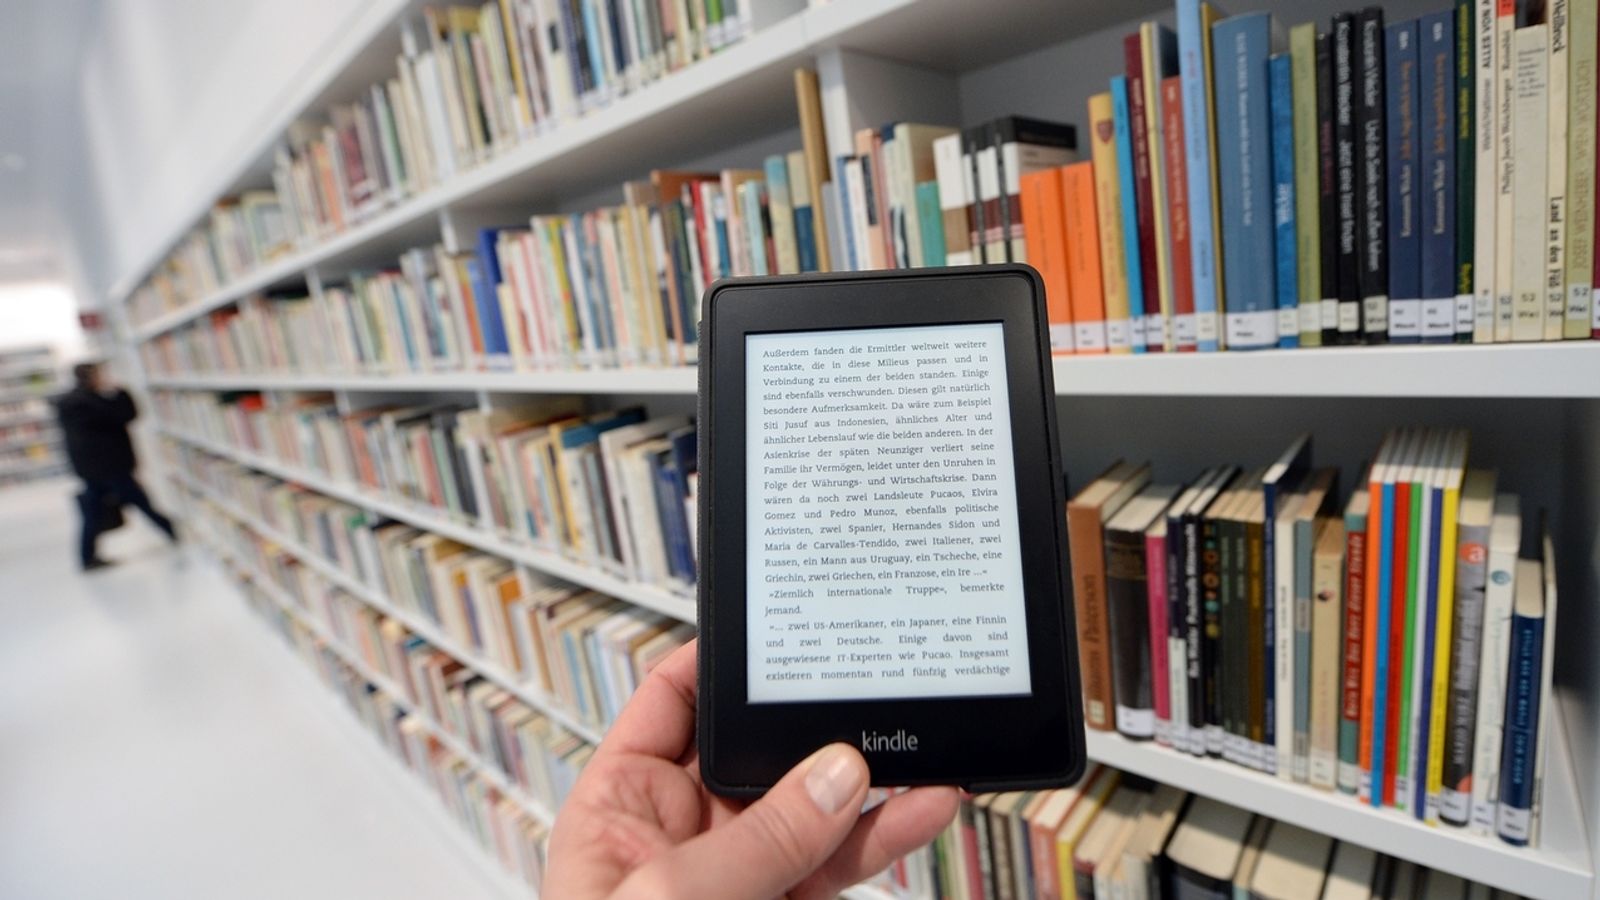 "You're crazy": libraries and publishers are arguing over e-books